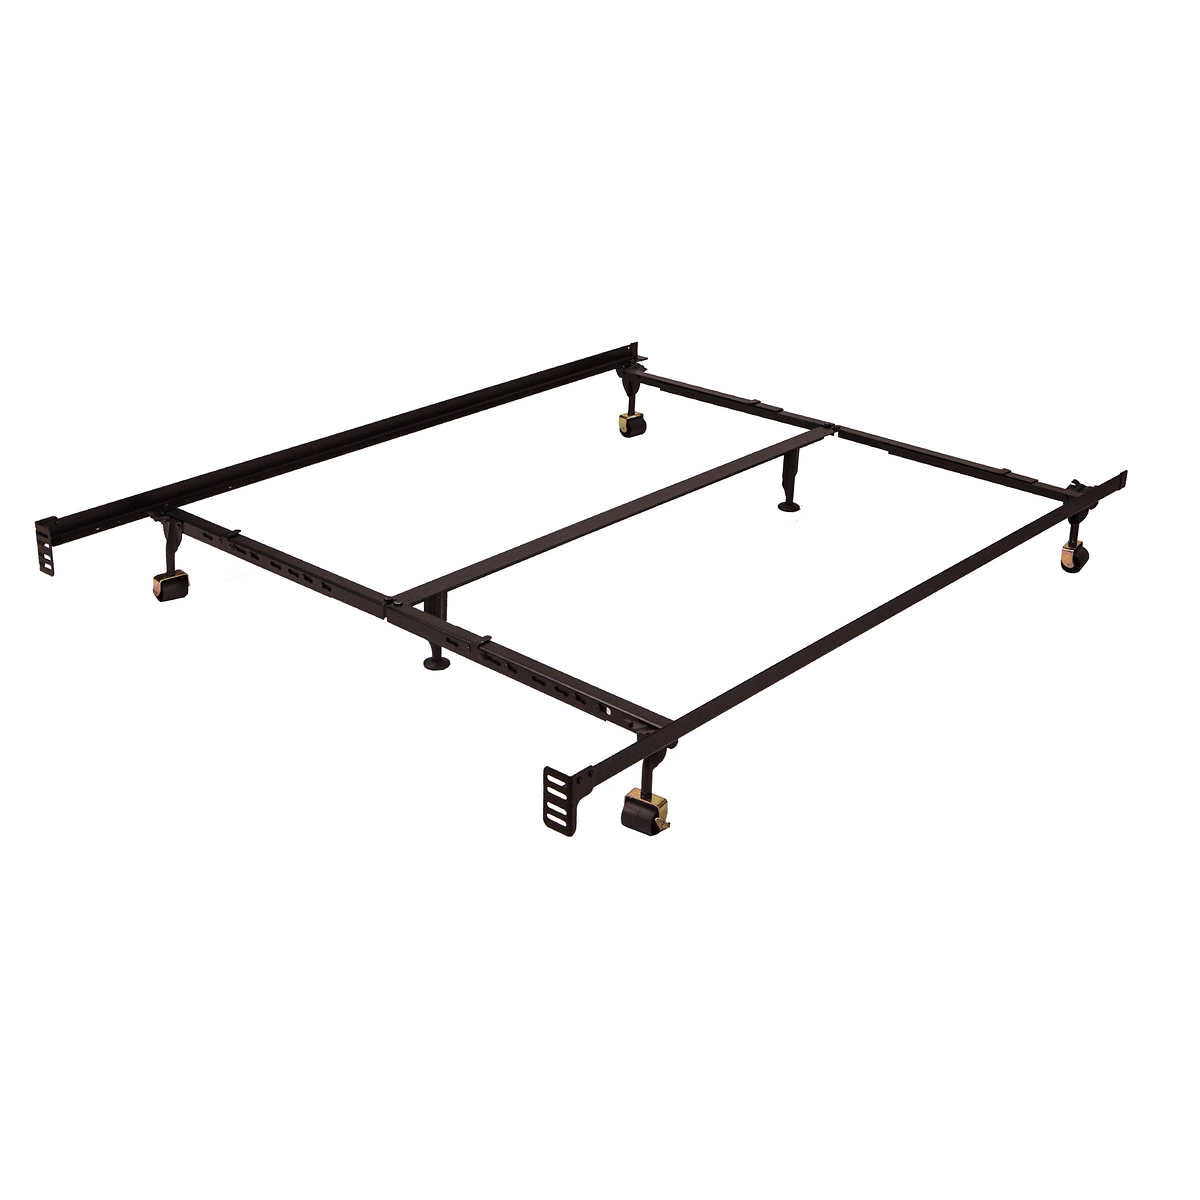 Like NEW - Premium Universal Lev-R-Lock Bed Hollywood Frame- Fits standard Twin, Full, Queen, King, California King sizes - Retail $79